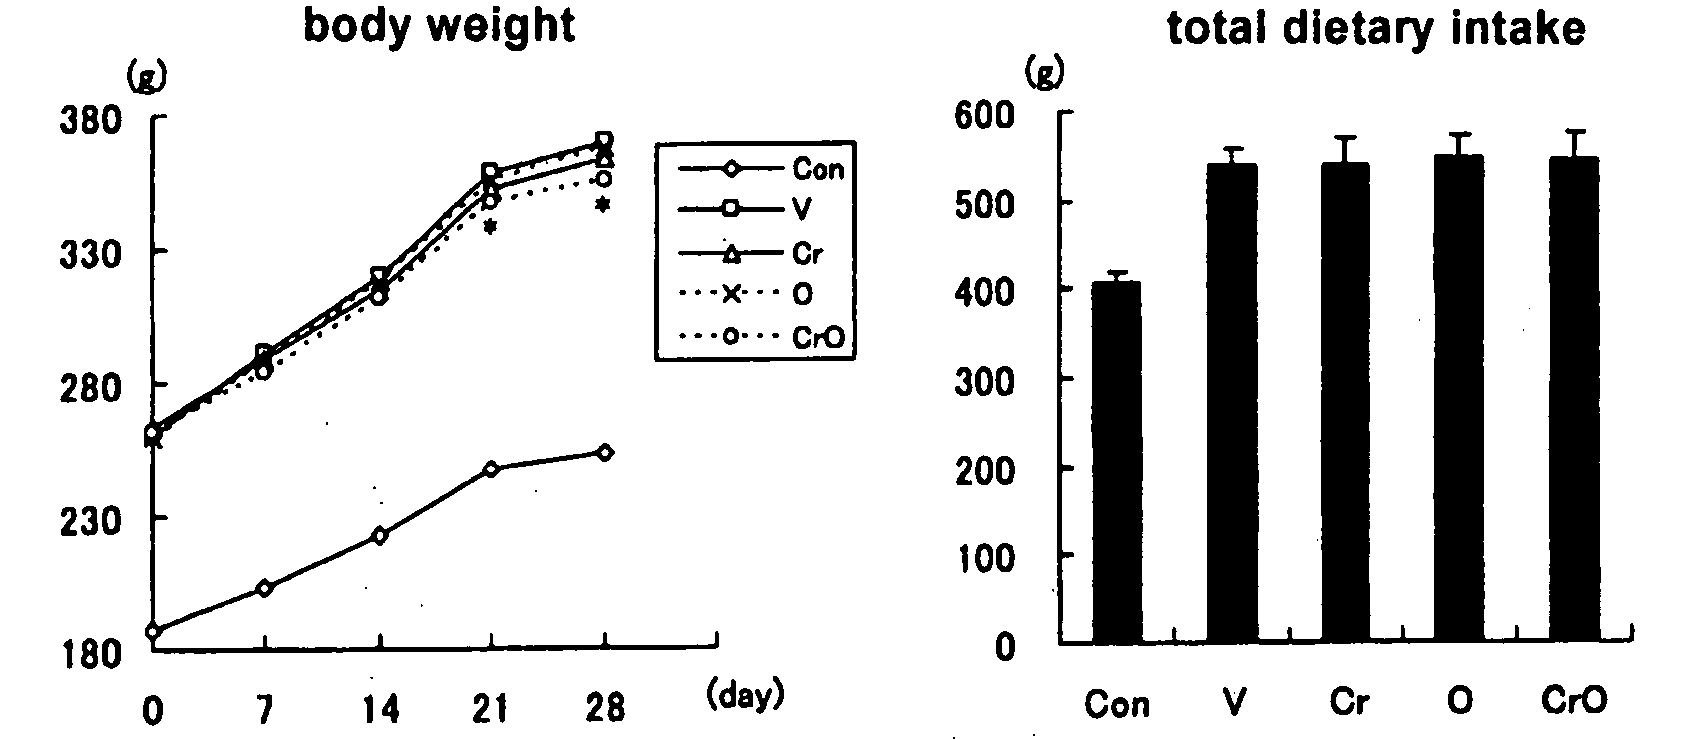 Mixture having effect of improving insulin resistance, effect of suppressing body weight gain, and effect of preventing and improving fatty liver